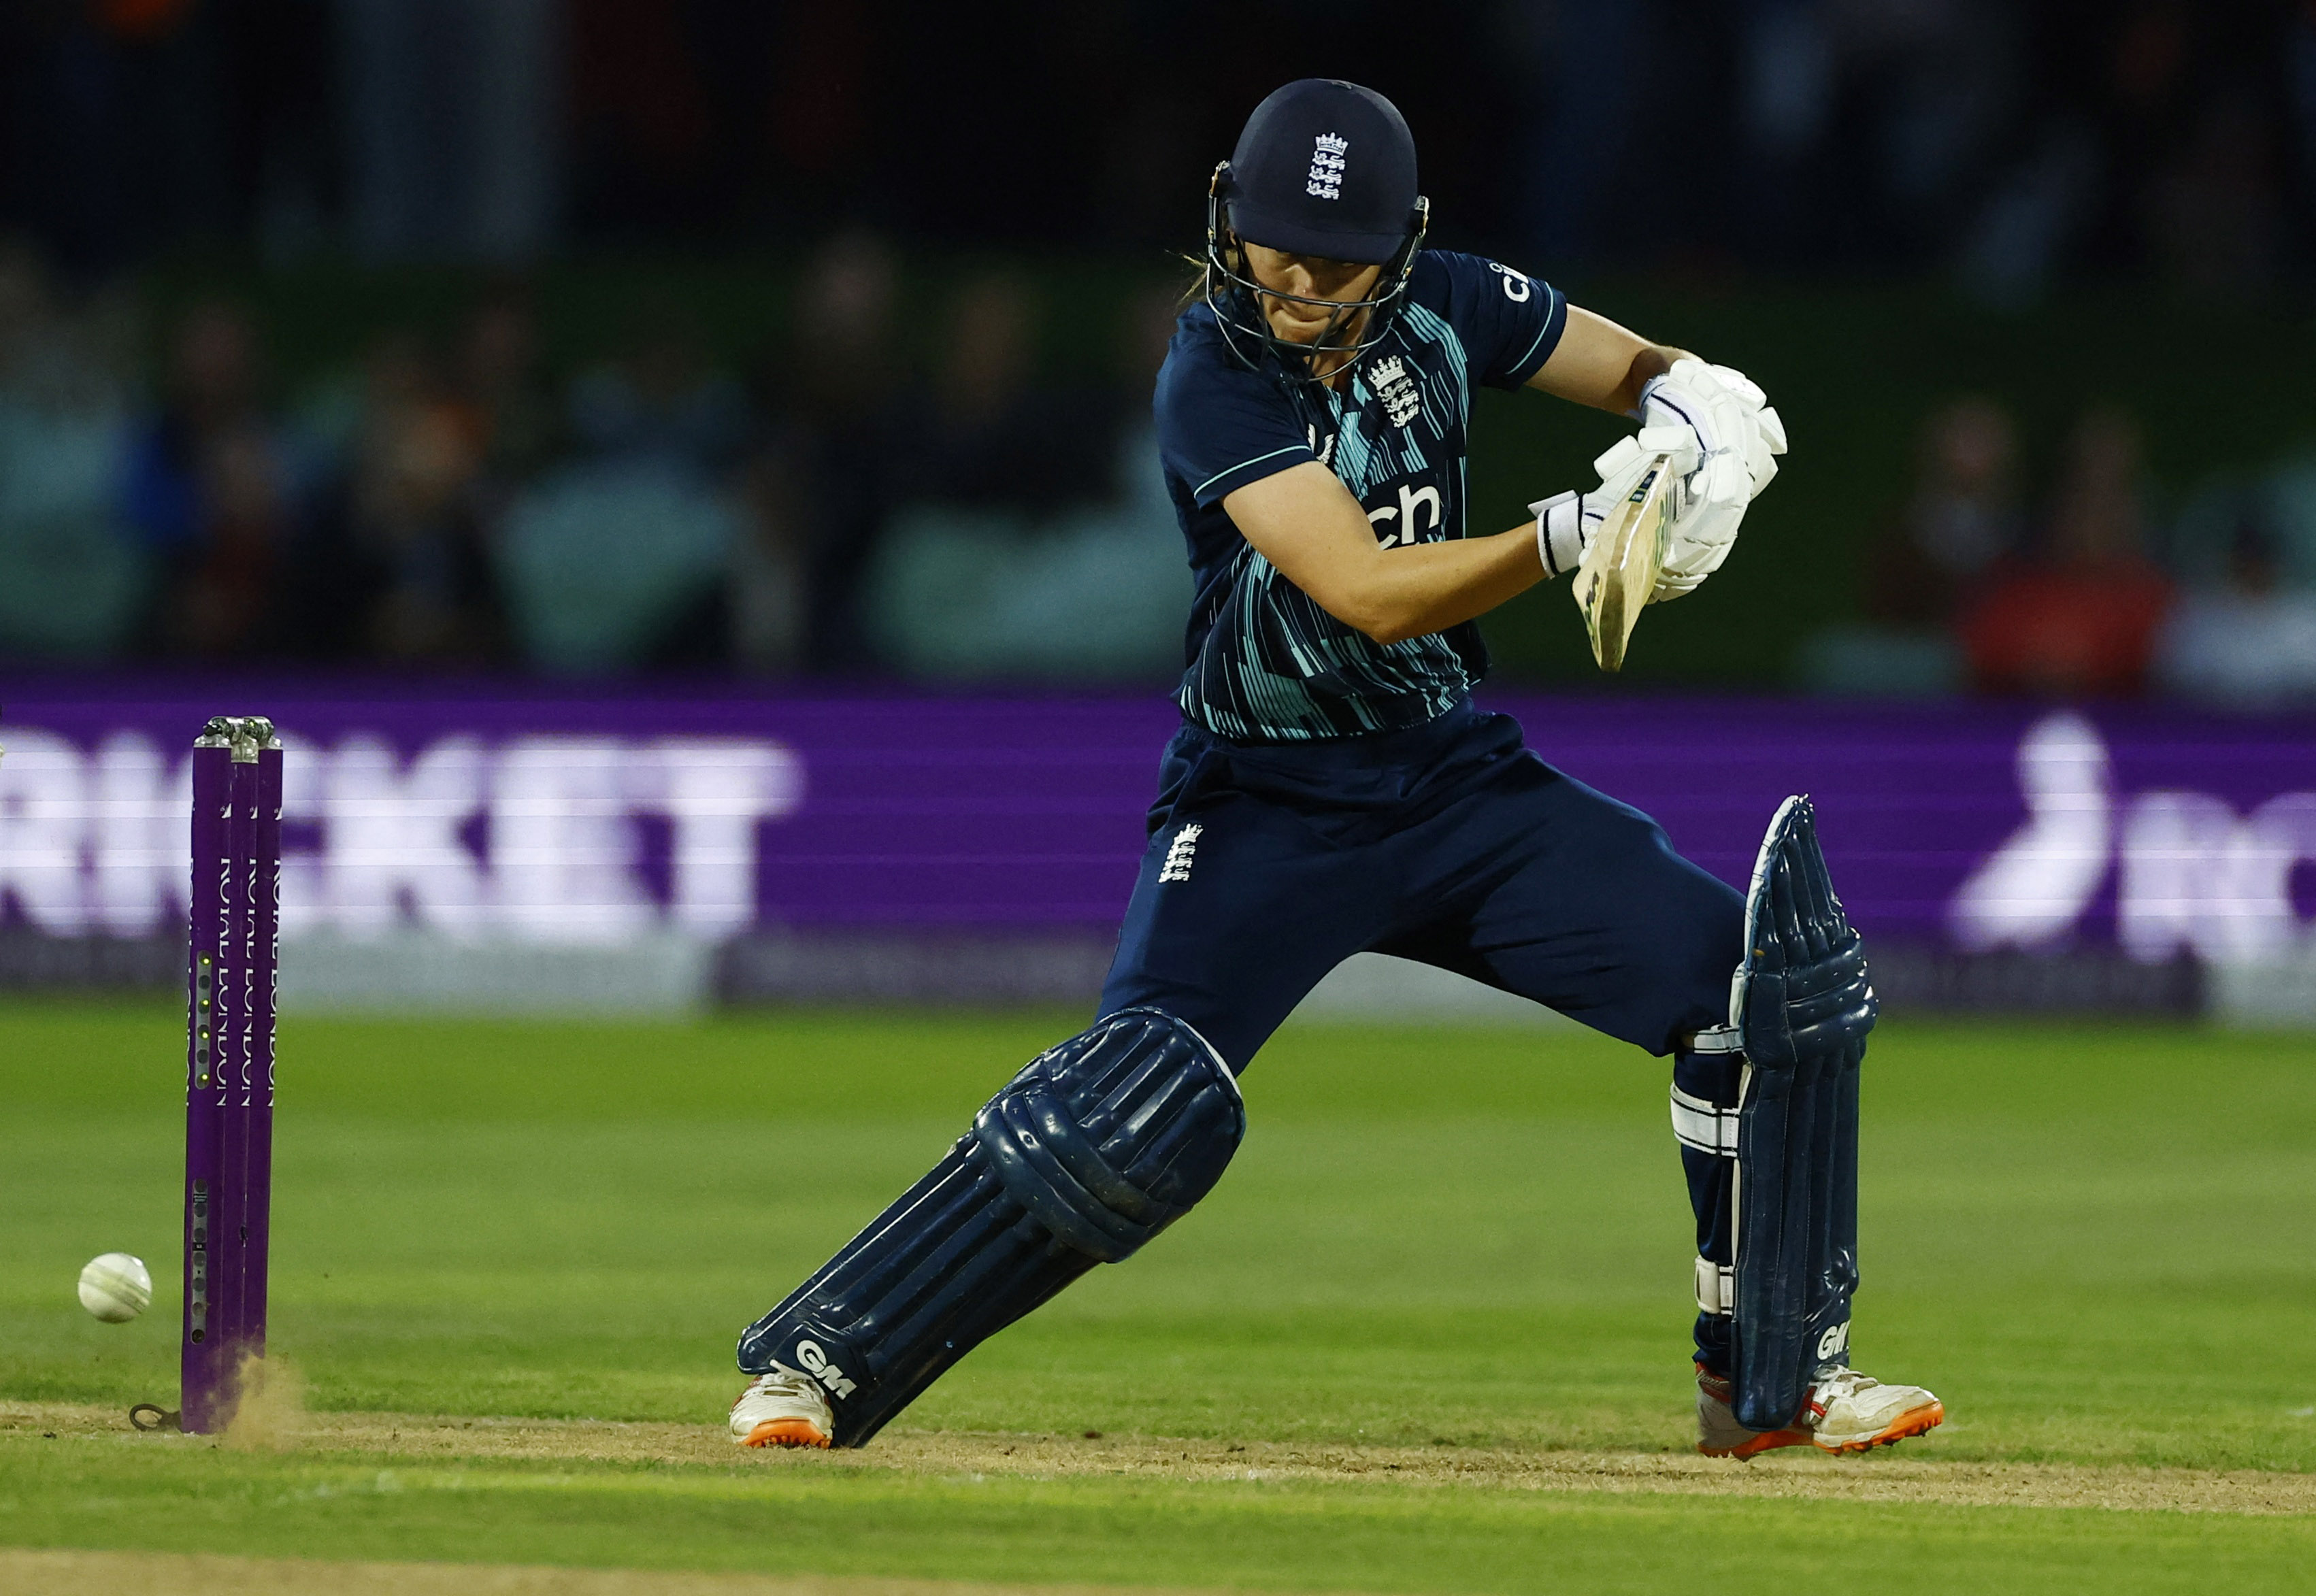 The buzz around women’s cricket: does increased participation lead to more injuries?